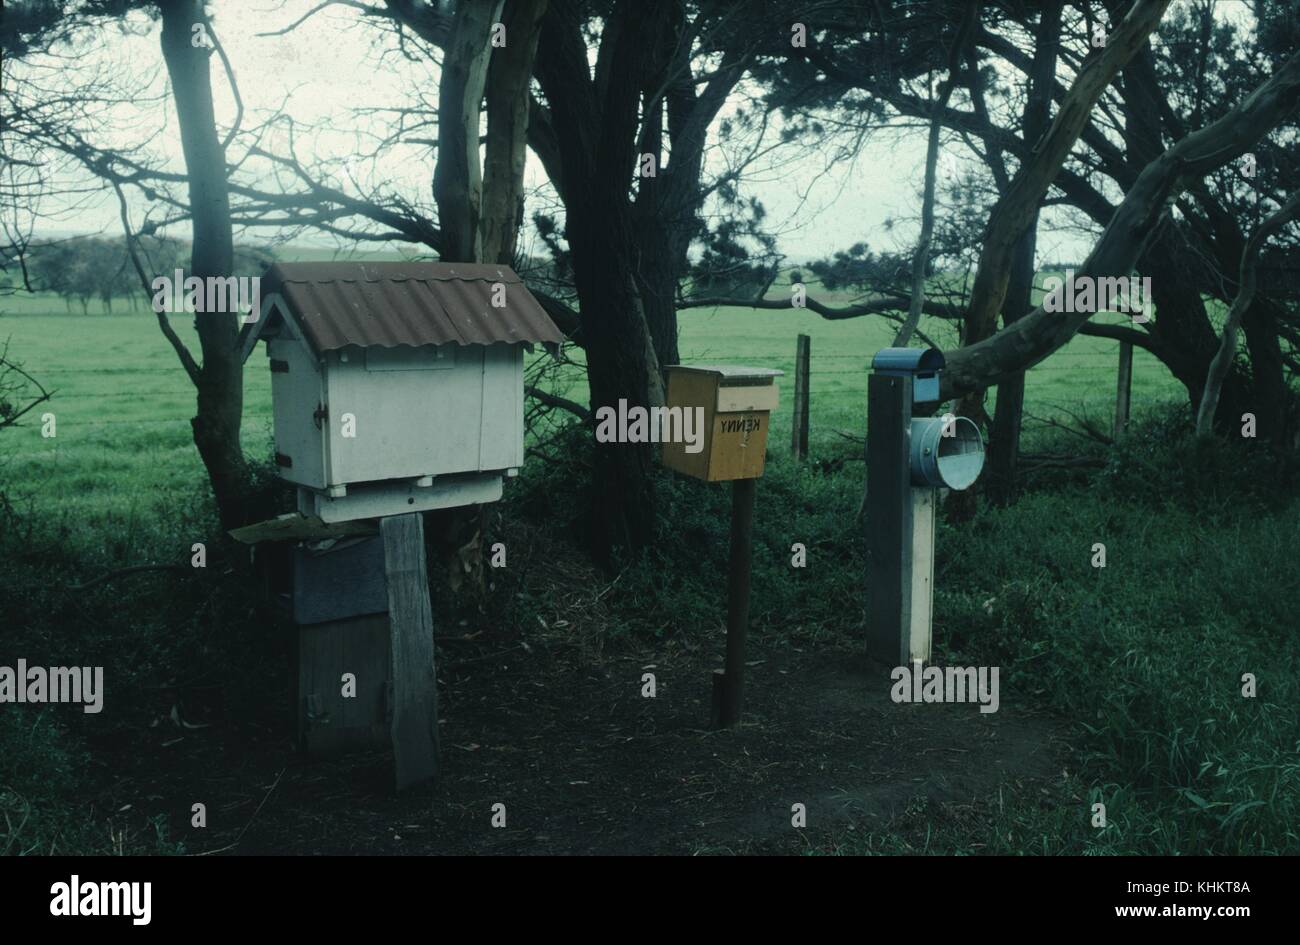 A photograph of three handmade mailboxes, the mailbox on the left is large and made to resemble a house, the middle mailbox is a simple box with a flap, the the mailbox on the right consists of two levels both made at least in part by large cans, behind the mailboxes lies a row of trees beyond which is an open green field, 1965. Stock Photo